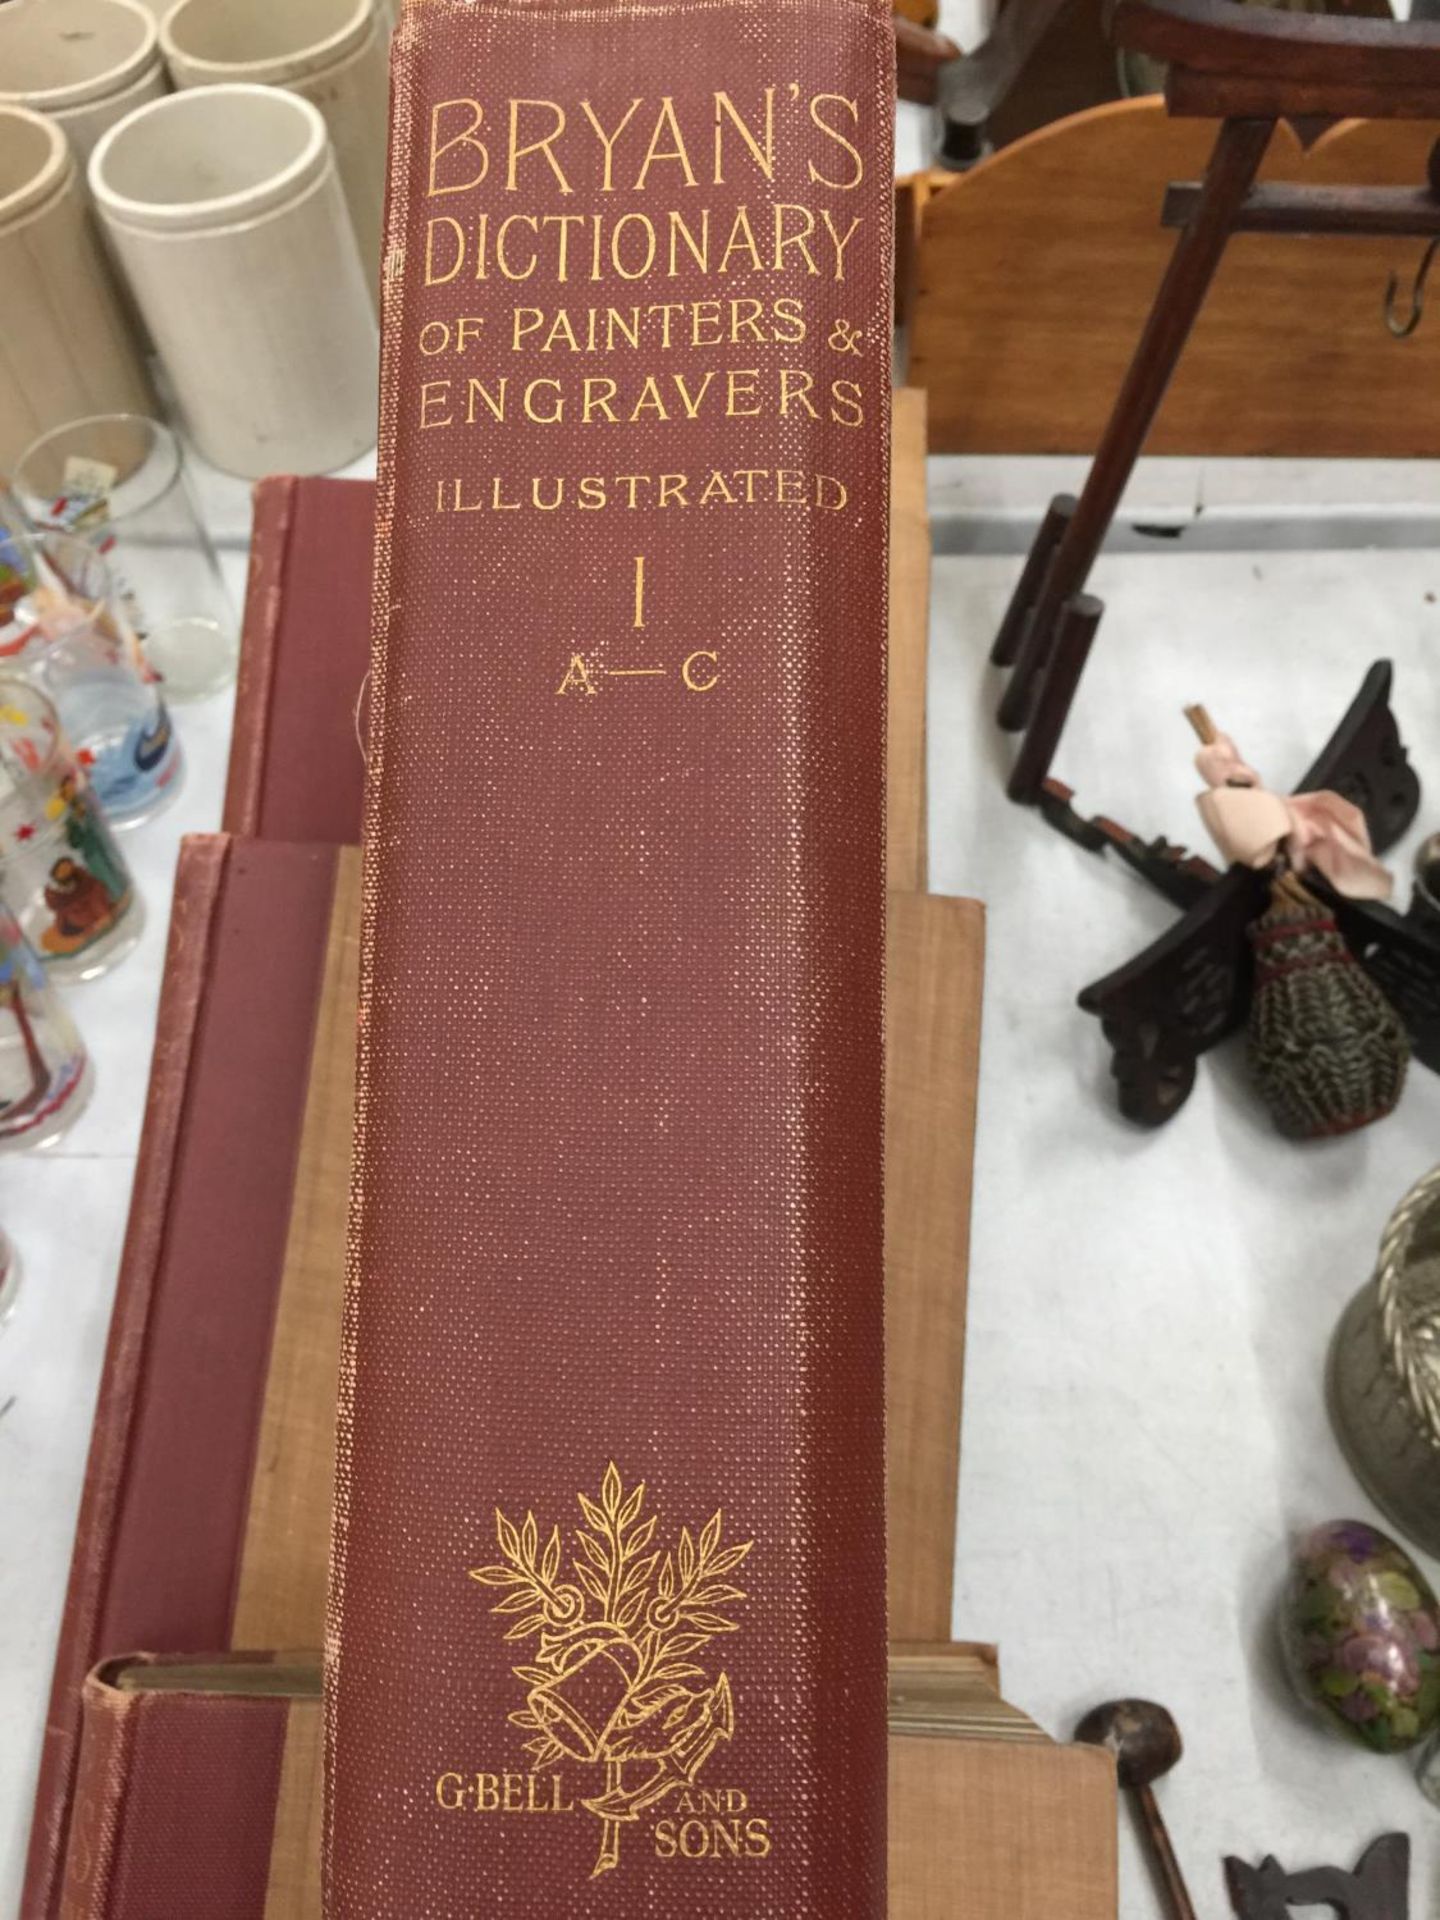 FIVE VOLUMES, 'BRYAN'S DICTIONARY OF PAINTERS AND ENGRAVERS' 1903 - Image 2 of 3